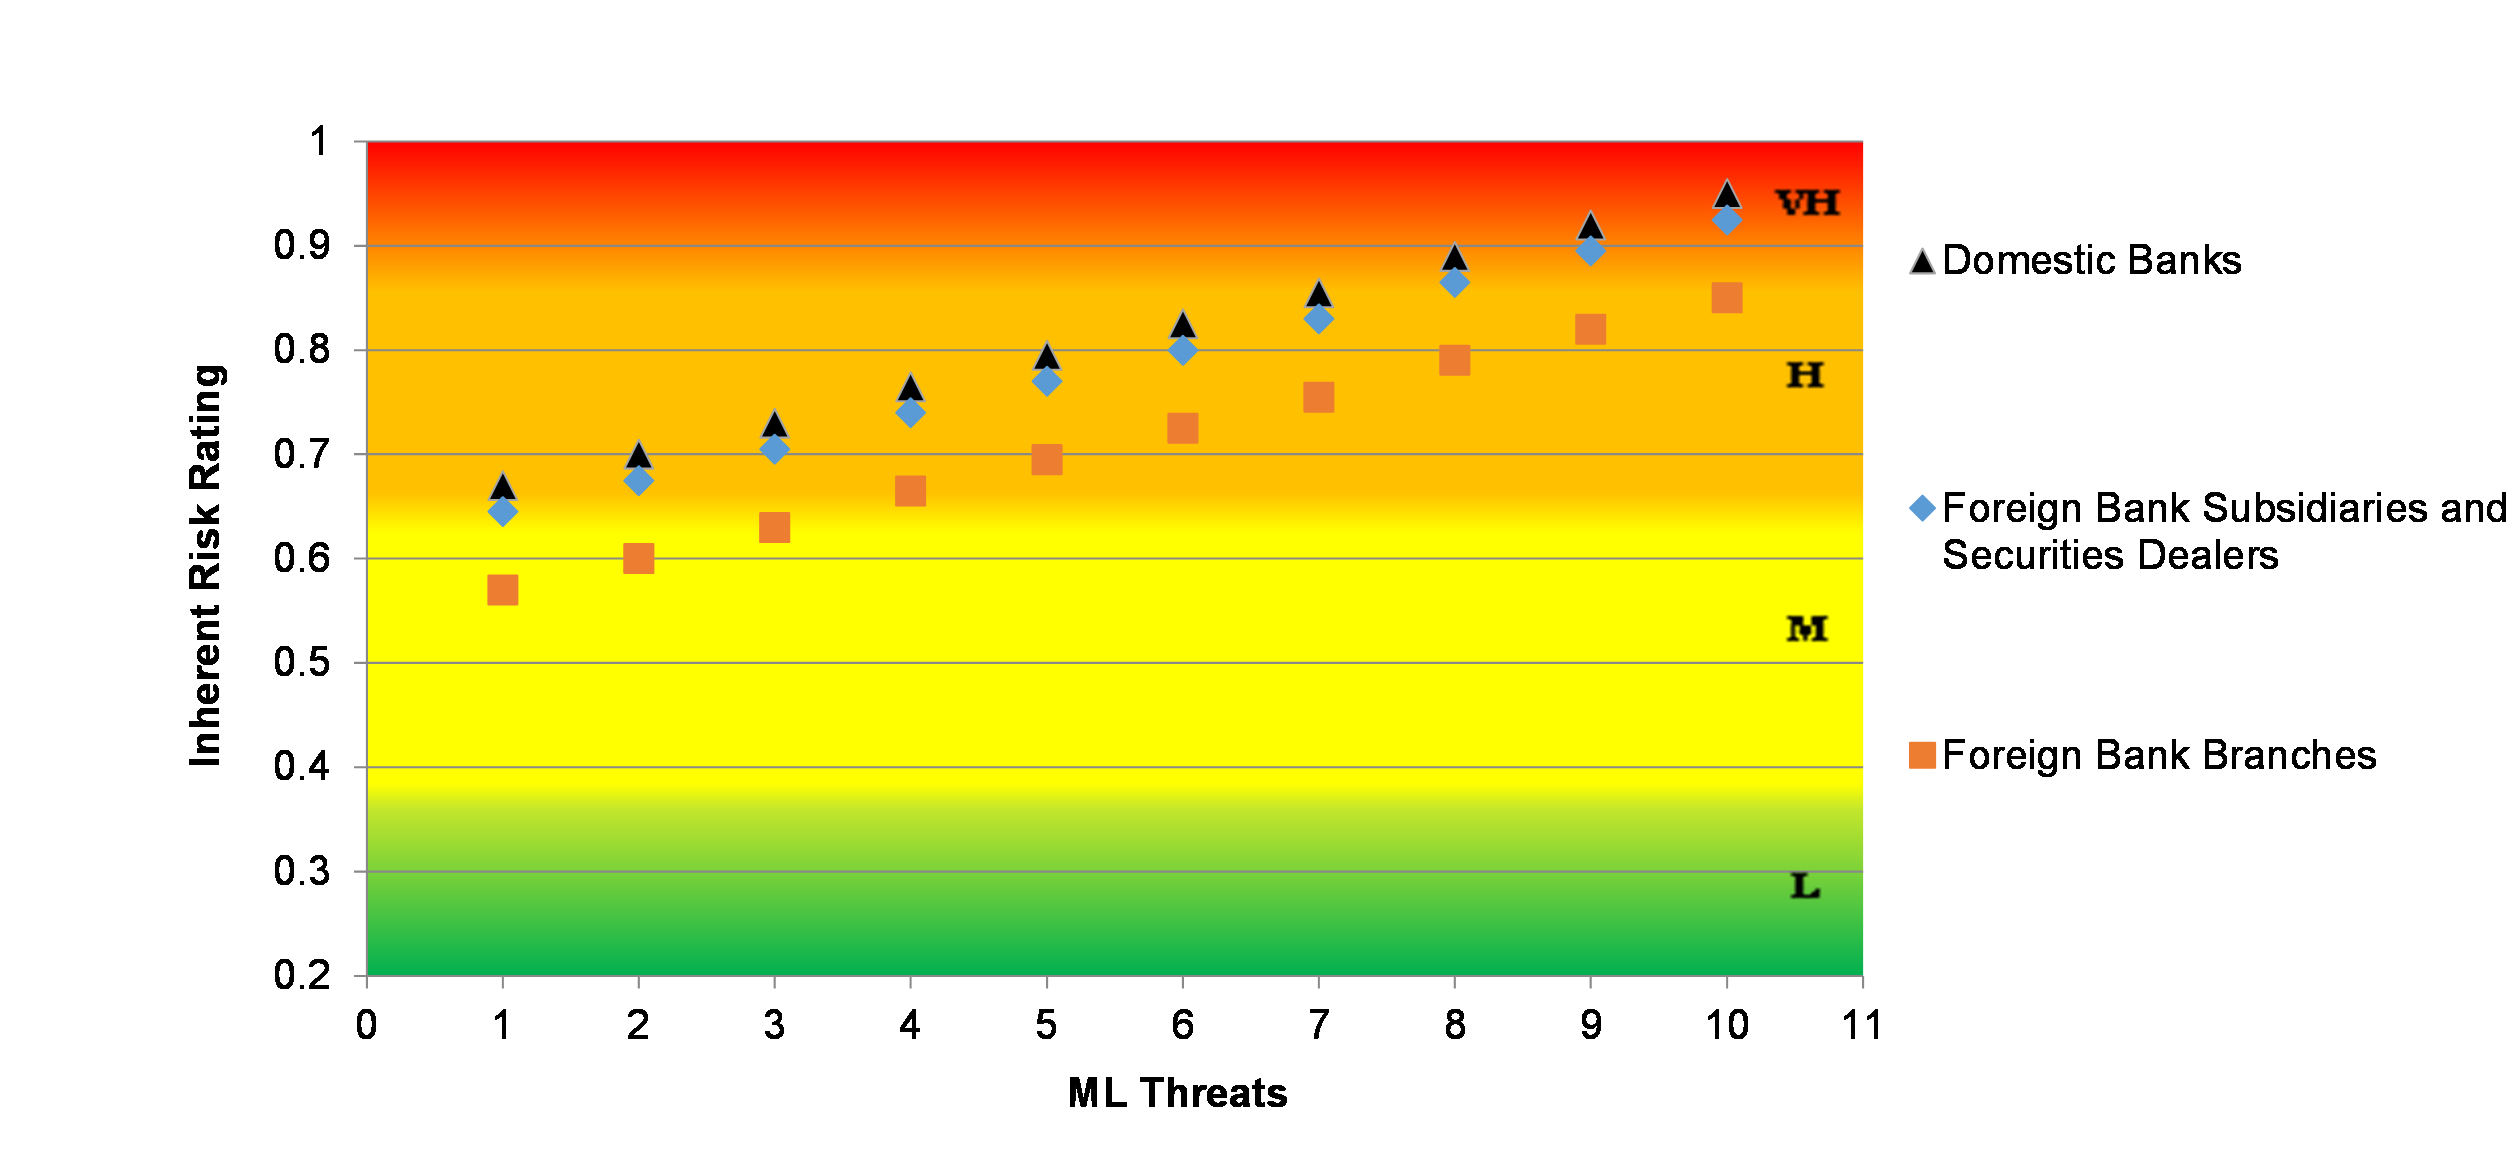 Figure 1a: Inherent ML Risks in Deposit-Taking Financial Institutions and Securities Dealers by Type of ML Threats